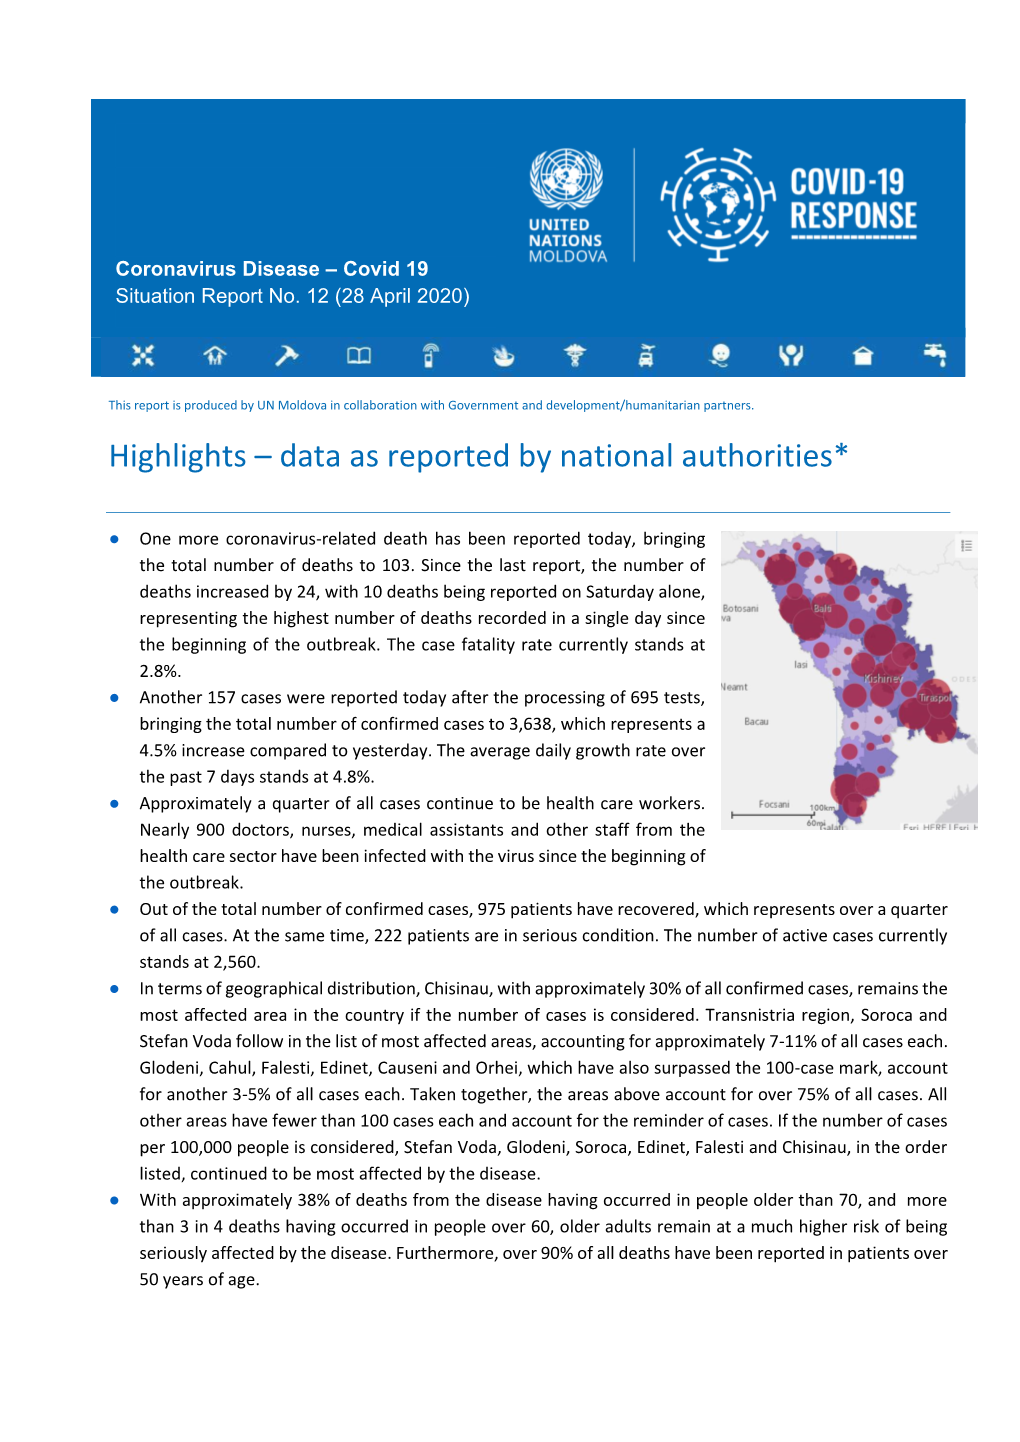 Highlights – Data As Reported by National Authorities*